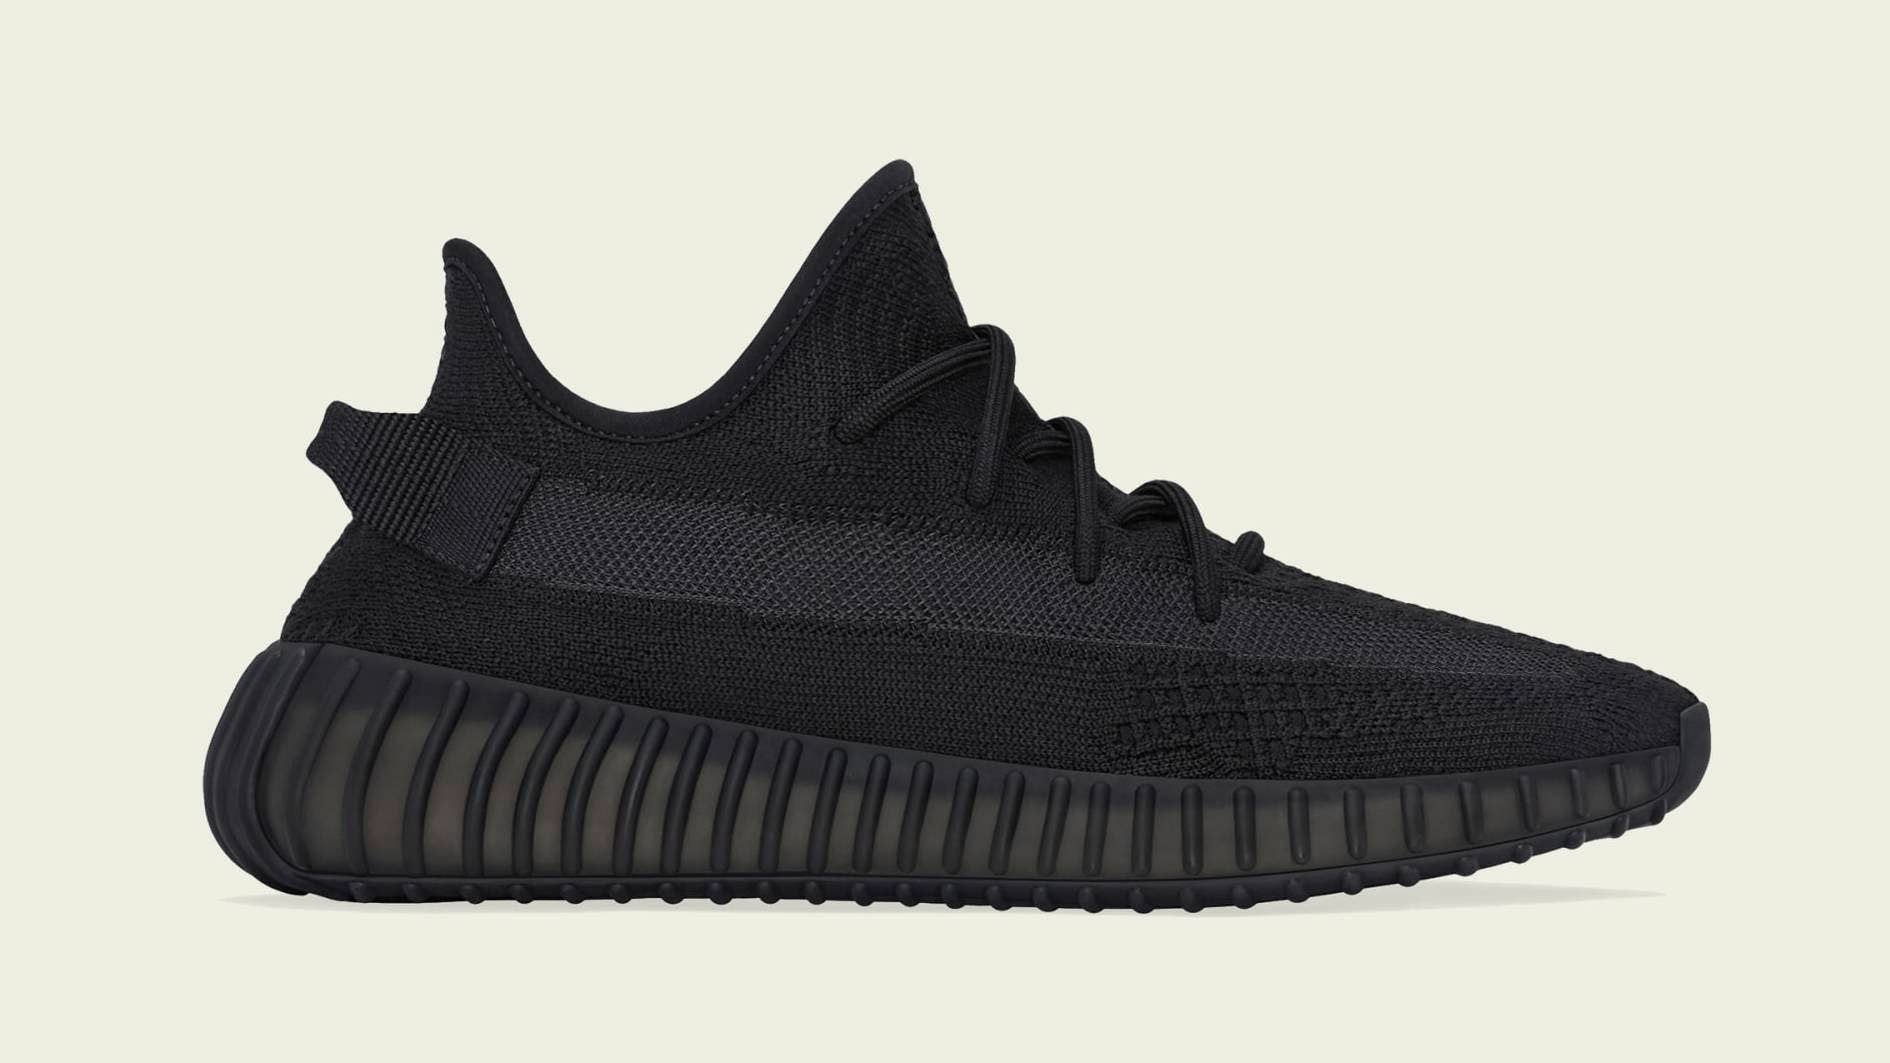 How to Buy the 'Onyx' Adidas Yeezy Boost 350 | Complex